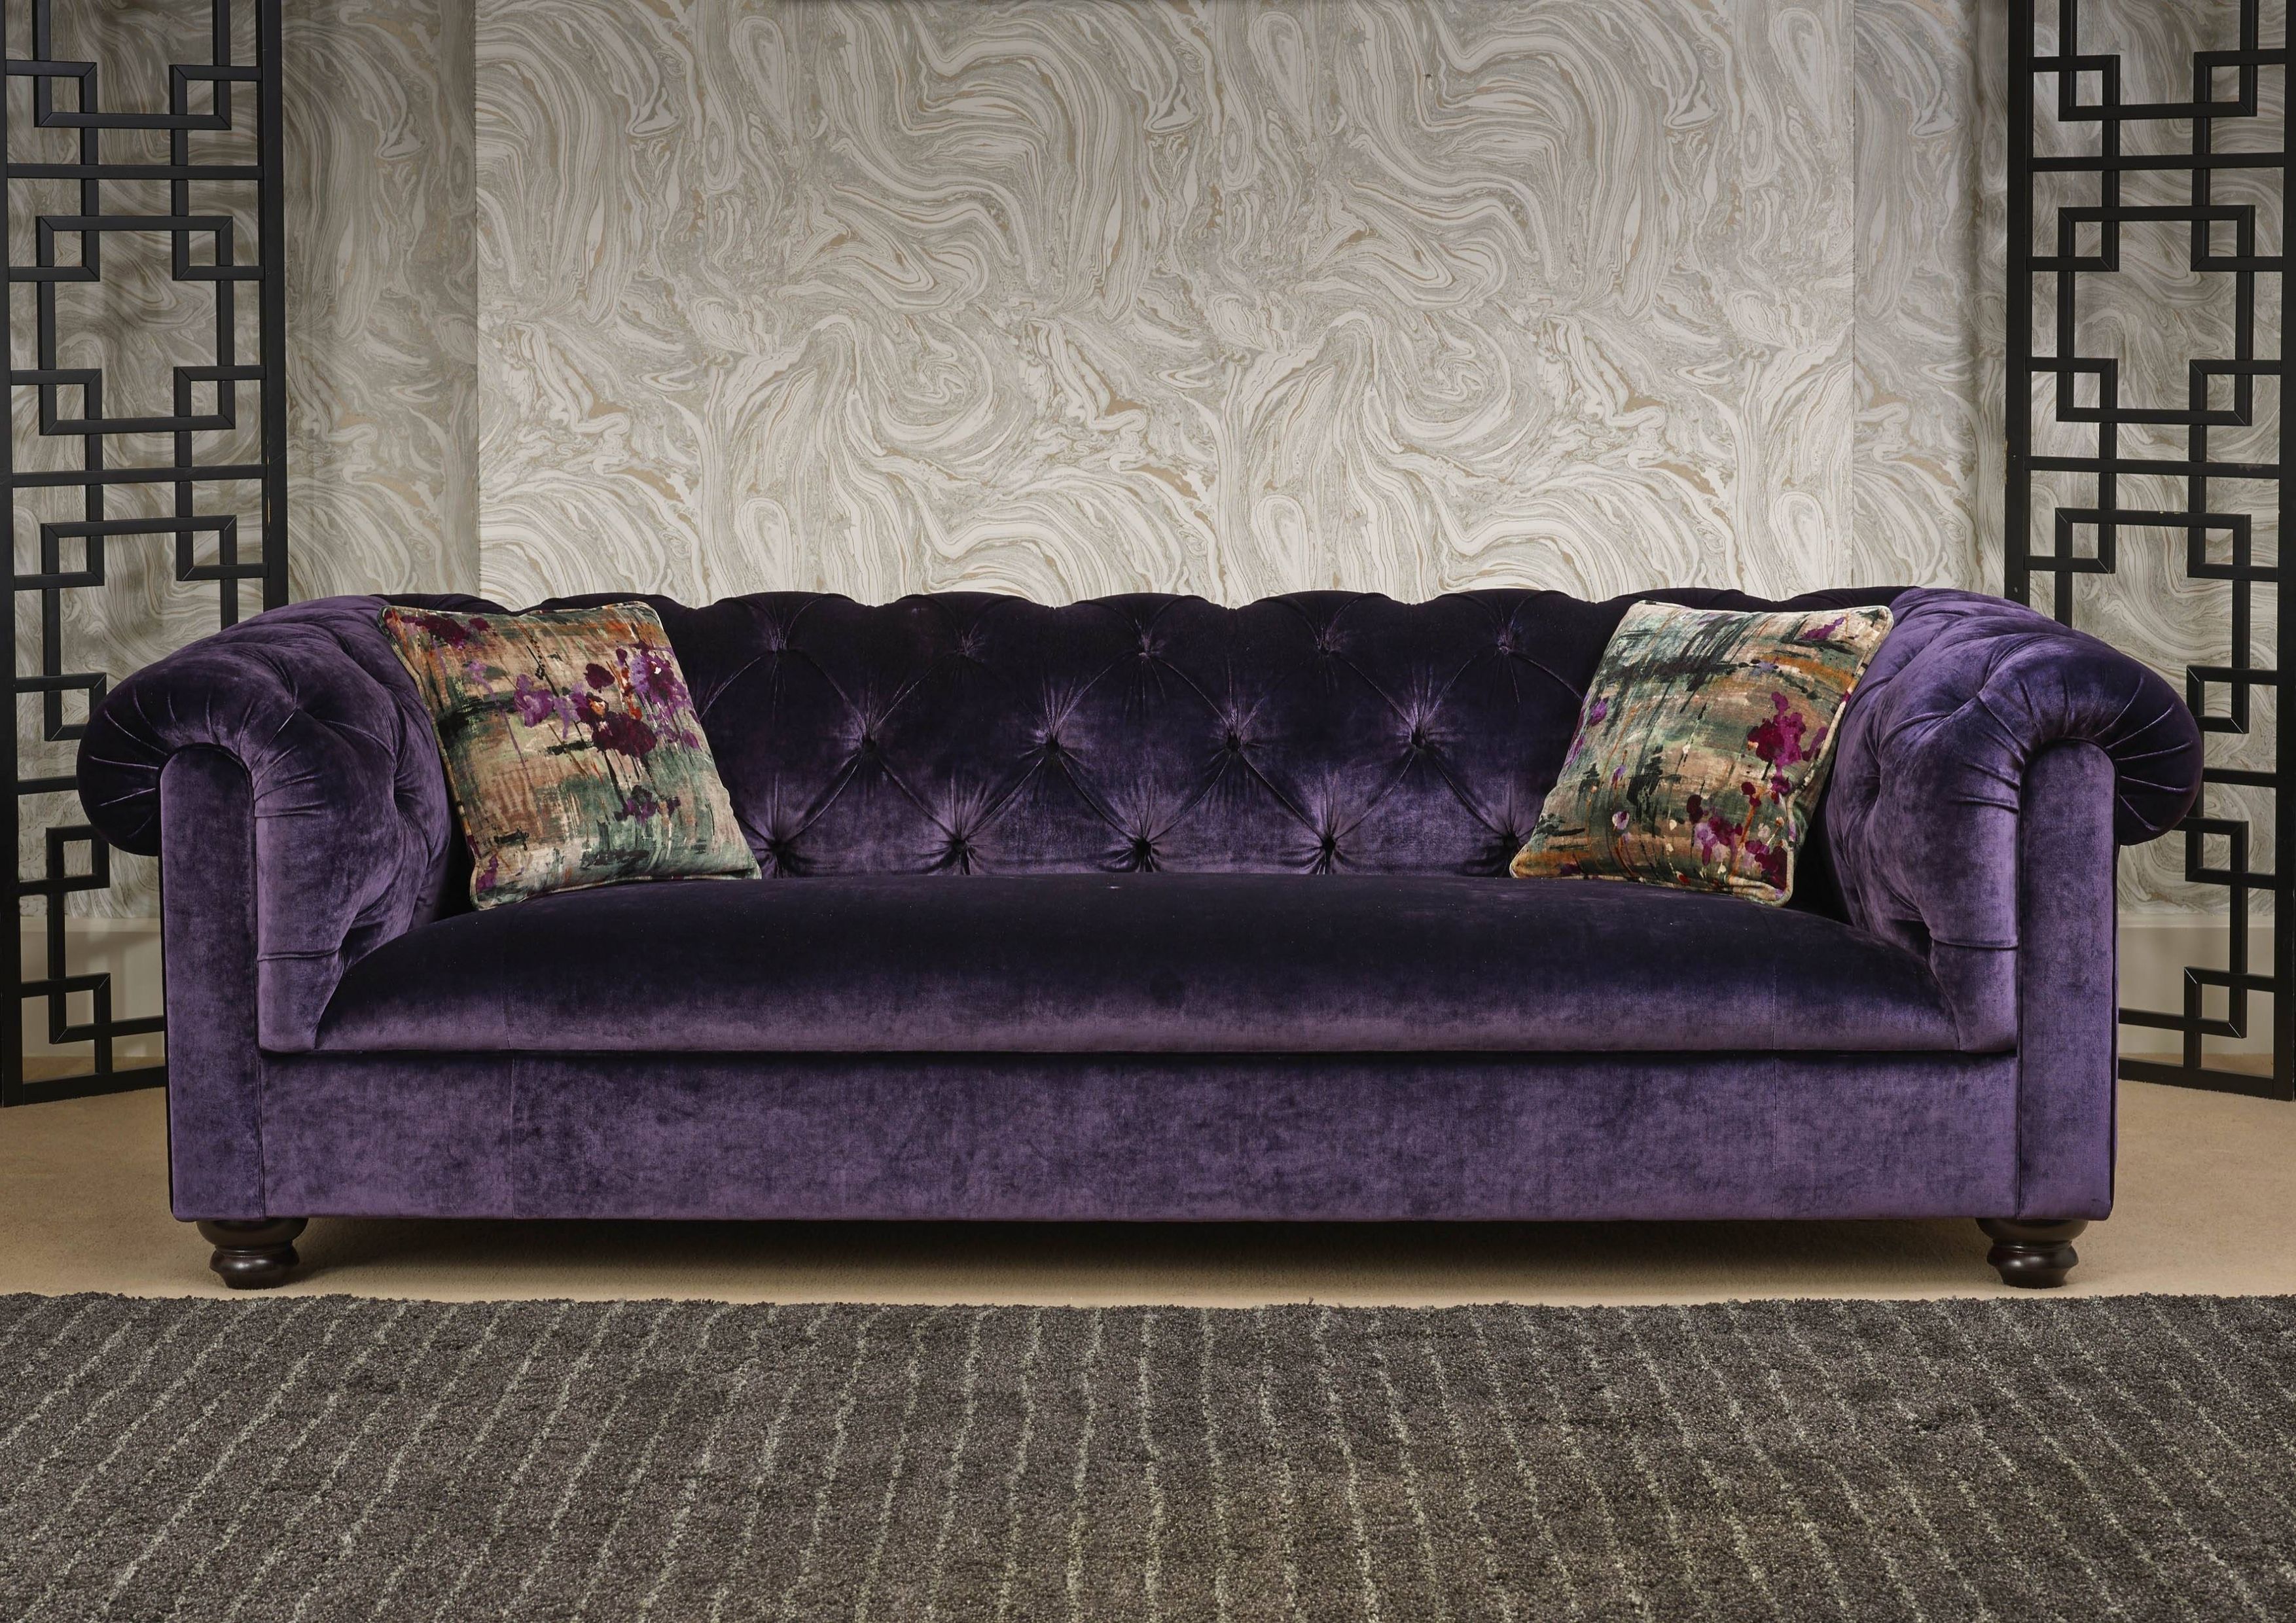 Home Design: Great 30 Best Collection Of Velvet Purple Sofas Throughout Well Liked Velvet Purple Sofas (View 11 of 15)